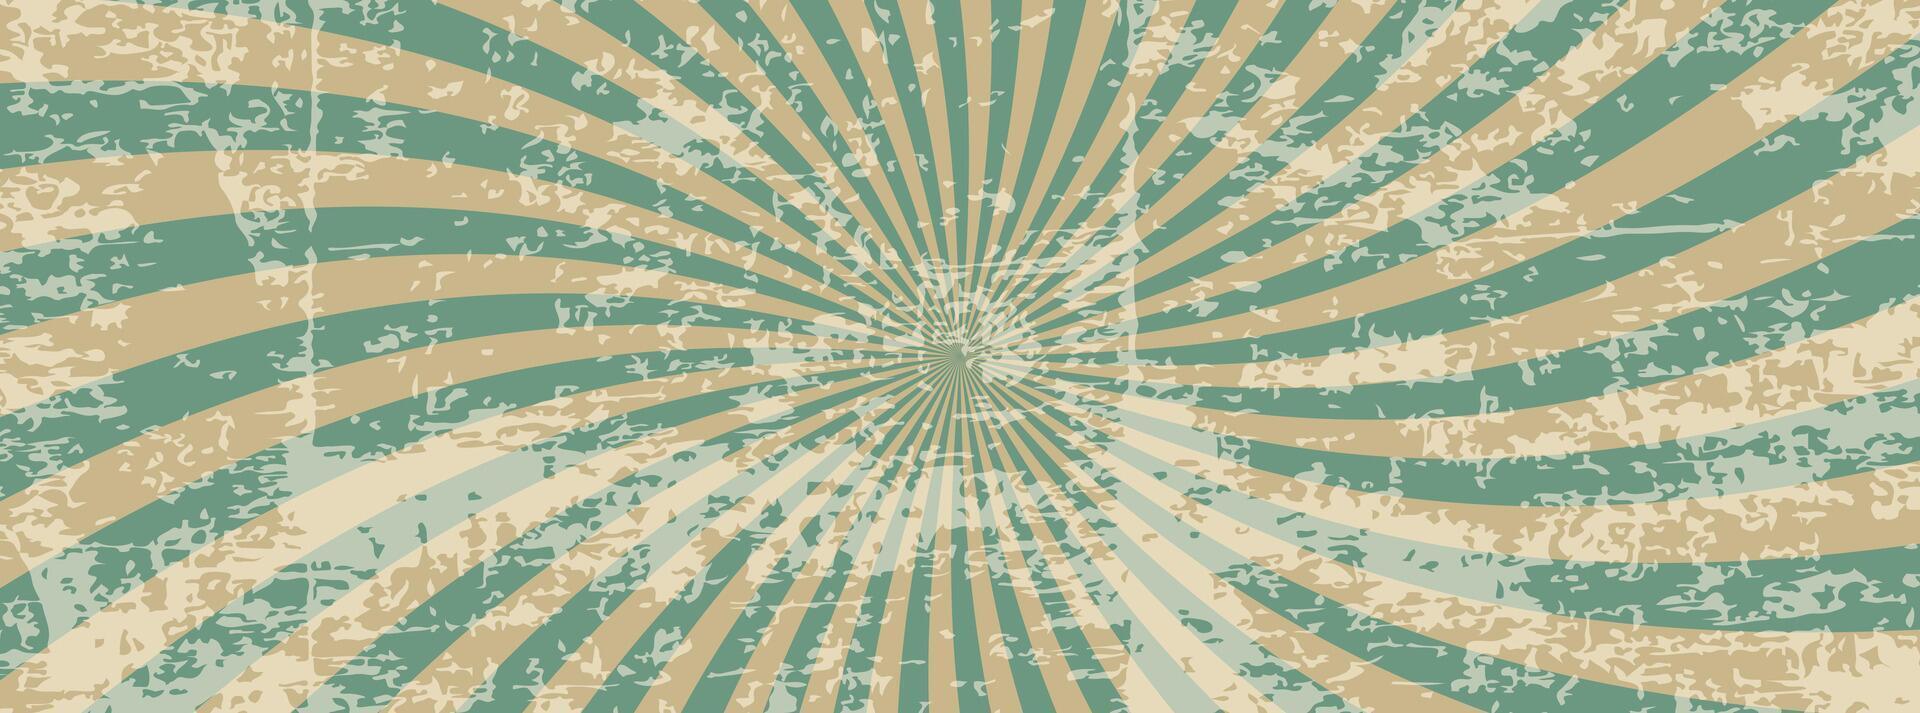 Retro circus background, vintage grunge shabby horizontal old poster background with diverging beams. vector